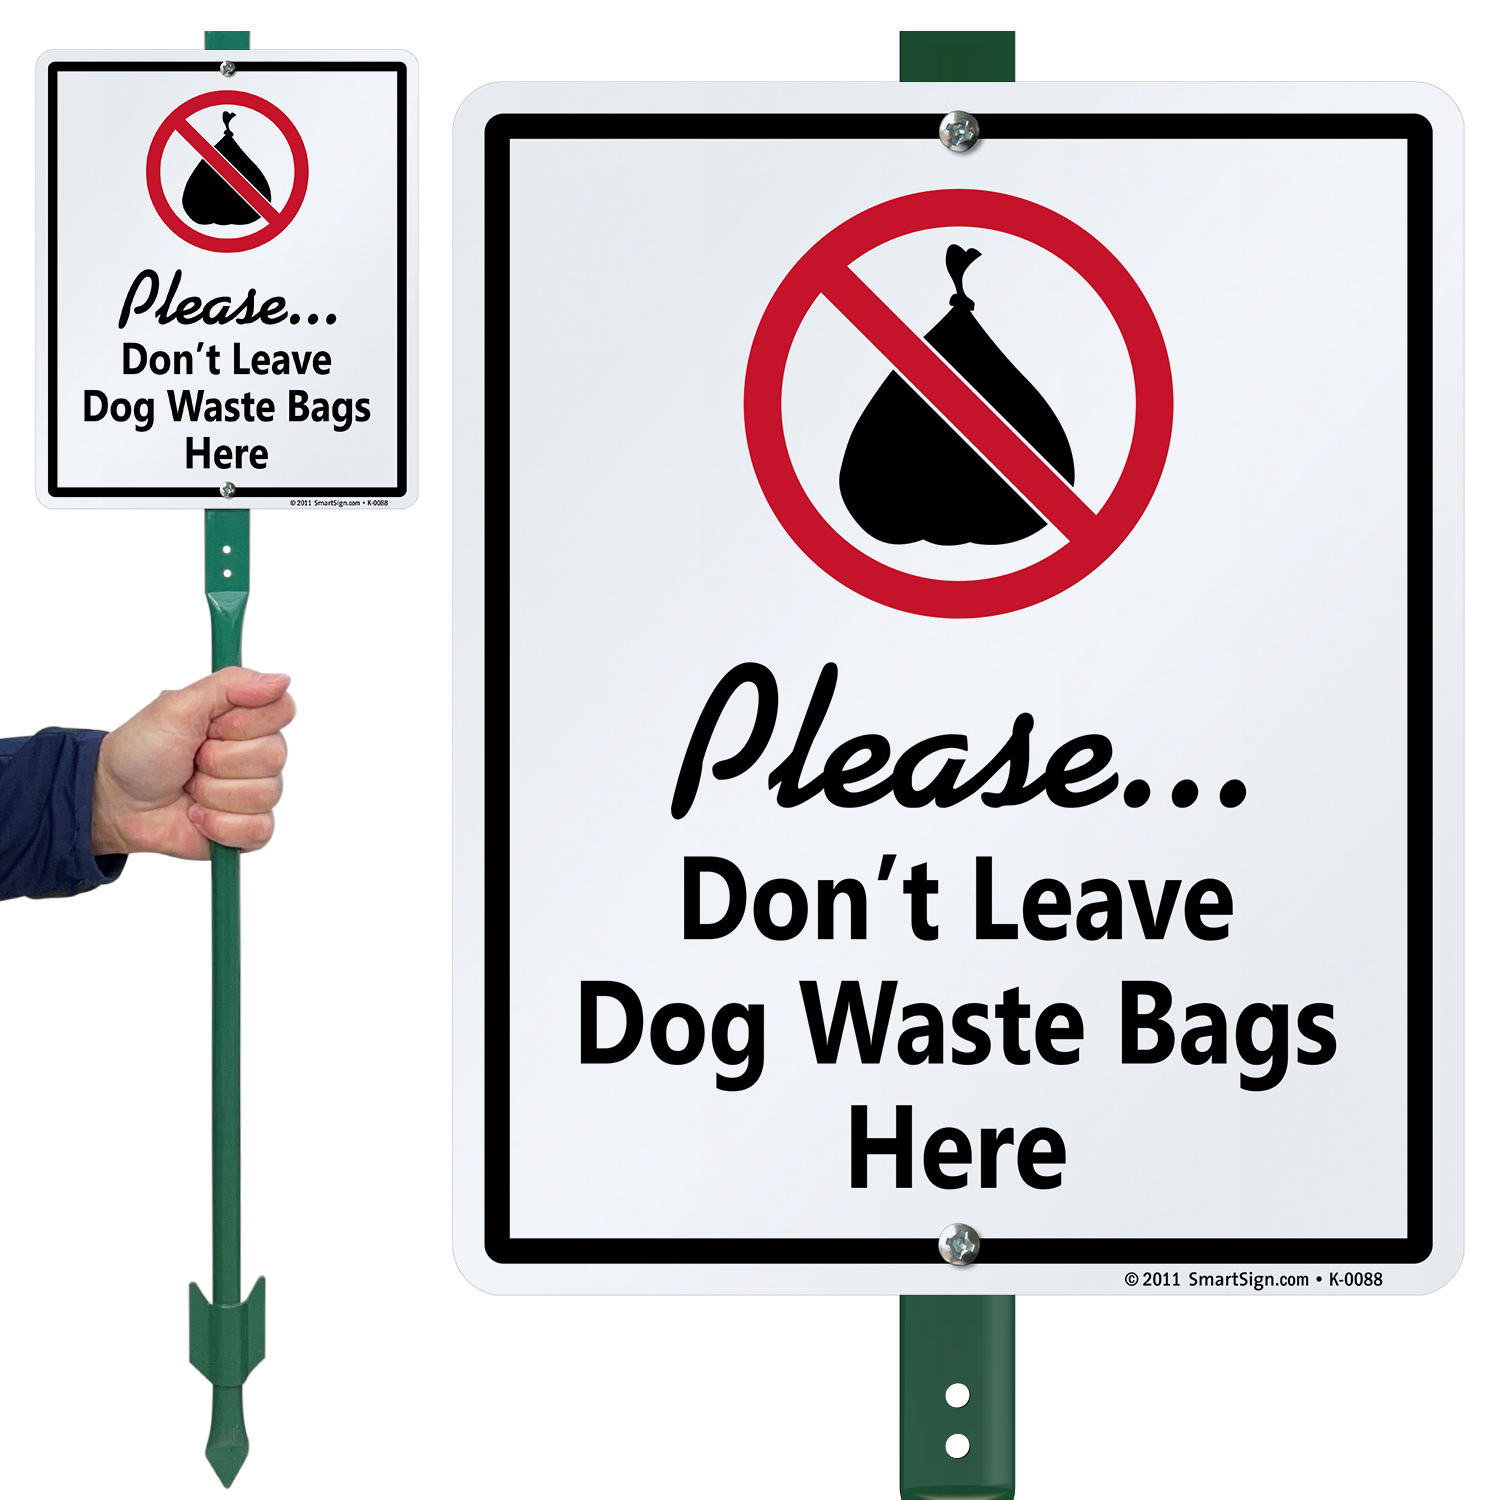 What To Do With Dog Poop | tunersread.com